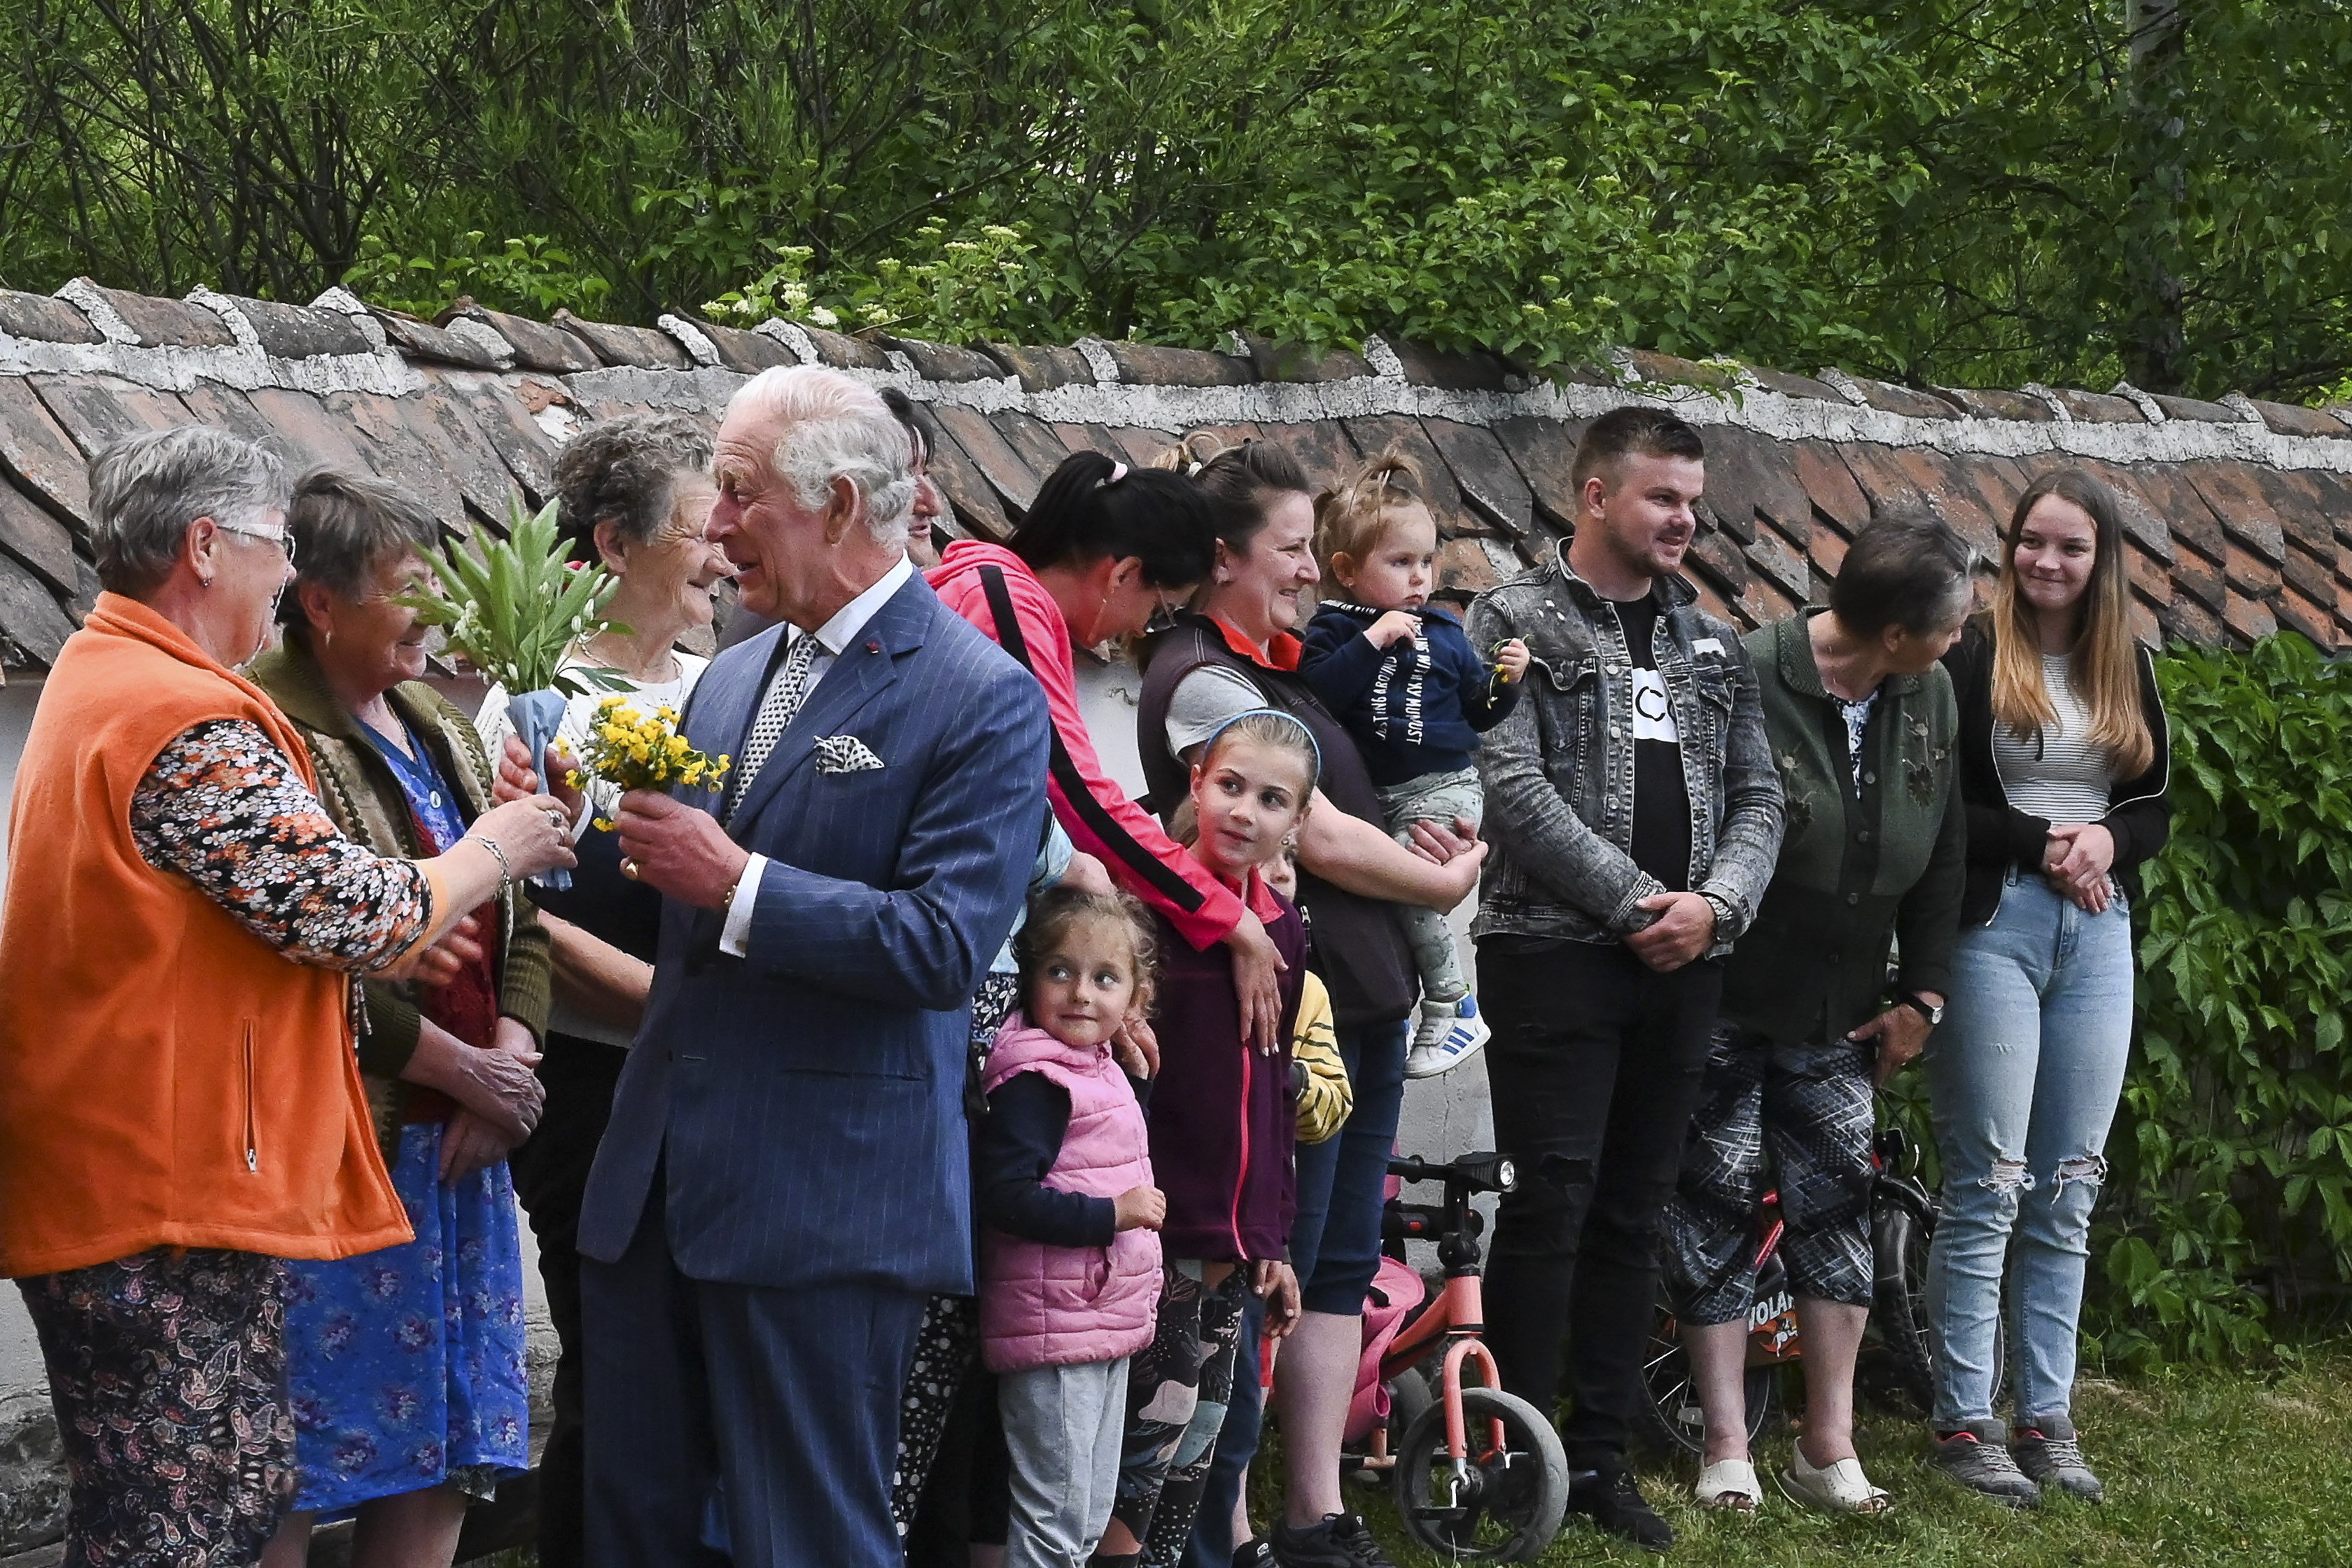 Britain’s King Charles receives flowers from locals as he arrives at his estate in Valea Zalanului (Zalan Valley), eastern Transylvania, Romania on Friday. Photo: EPA-EFE